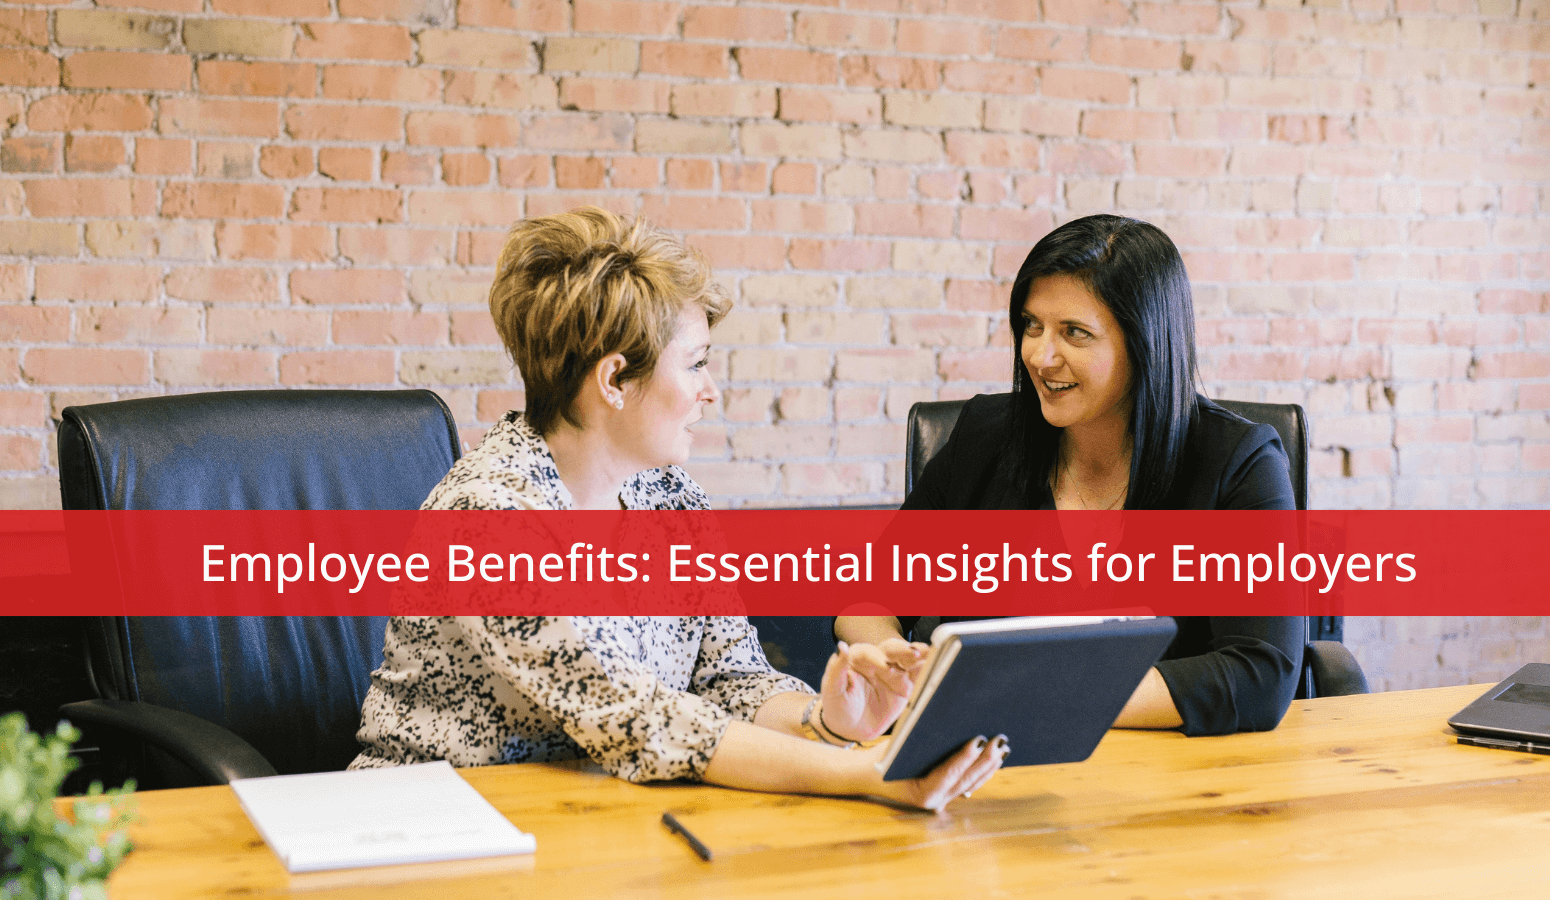 Featured image for “Employee Benefits: Essential Insights for Employers”